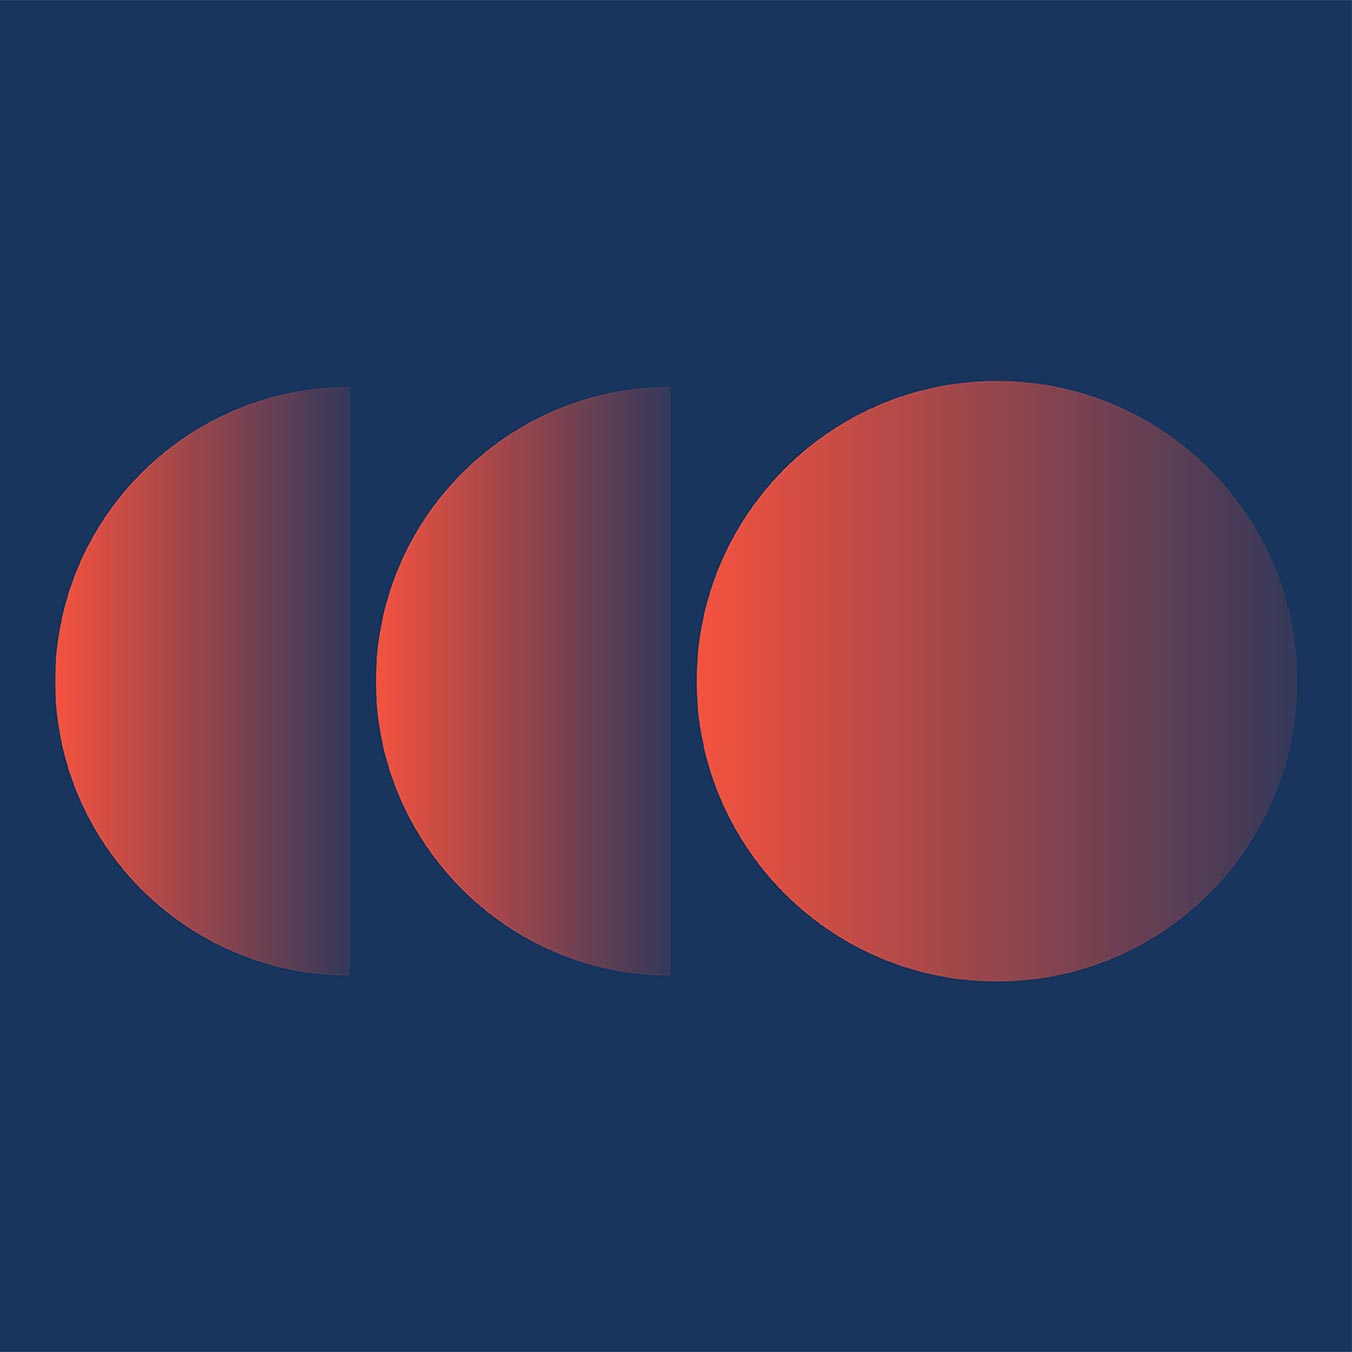 Two half circles and one full circle fading from red to navy blue.